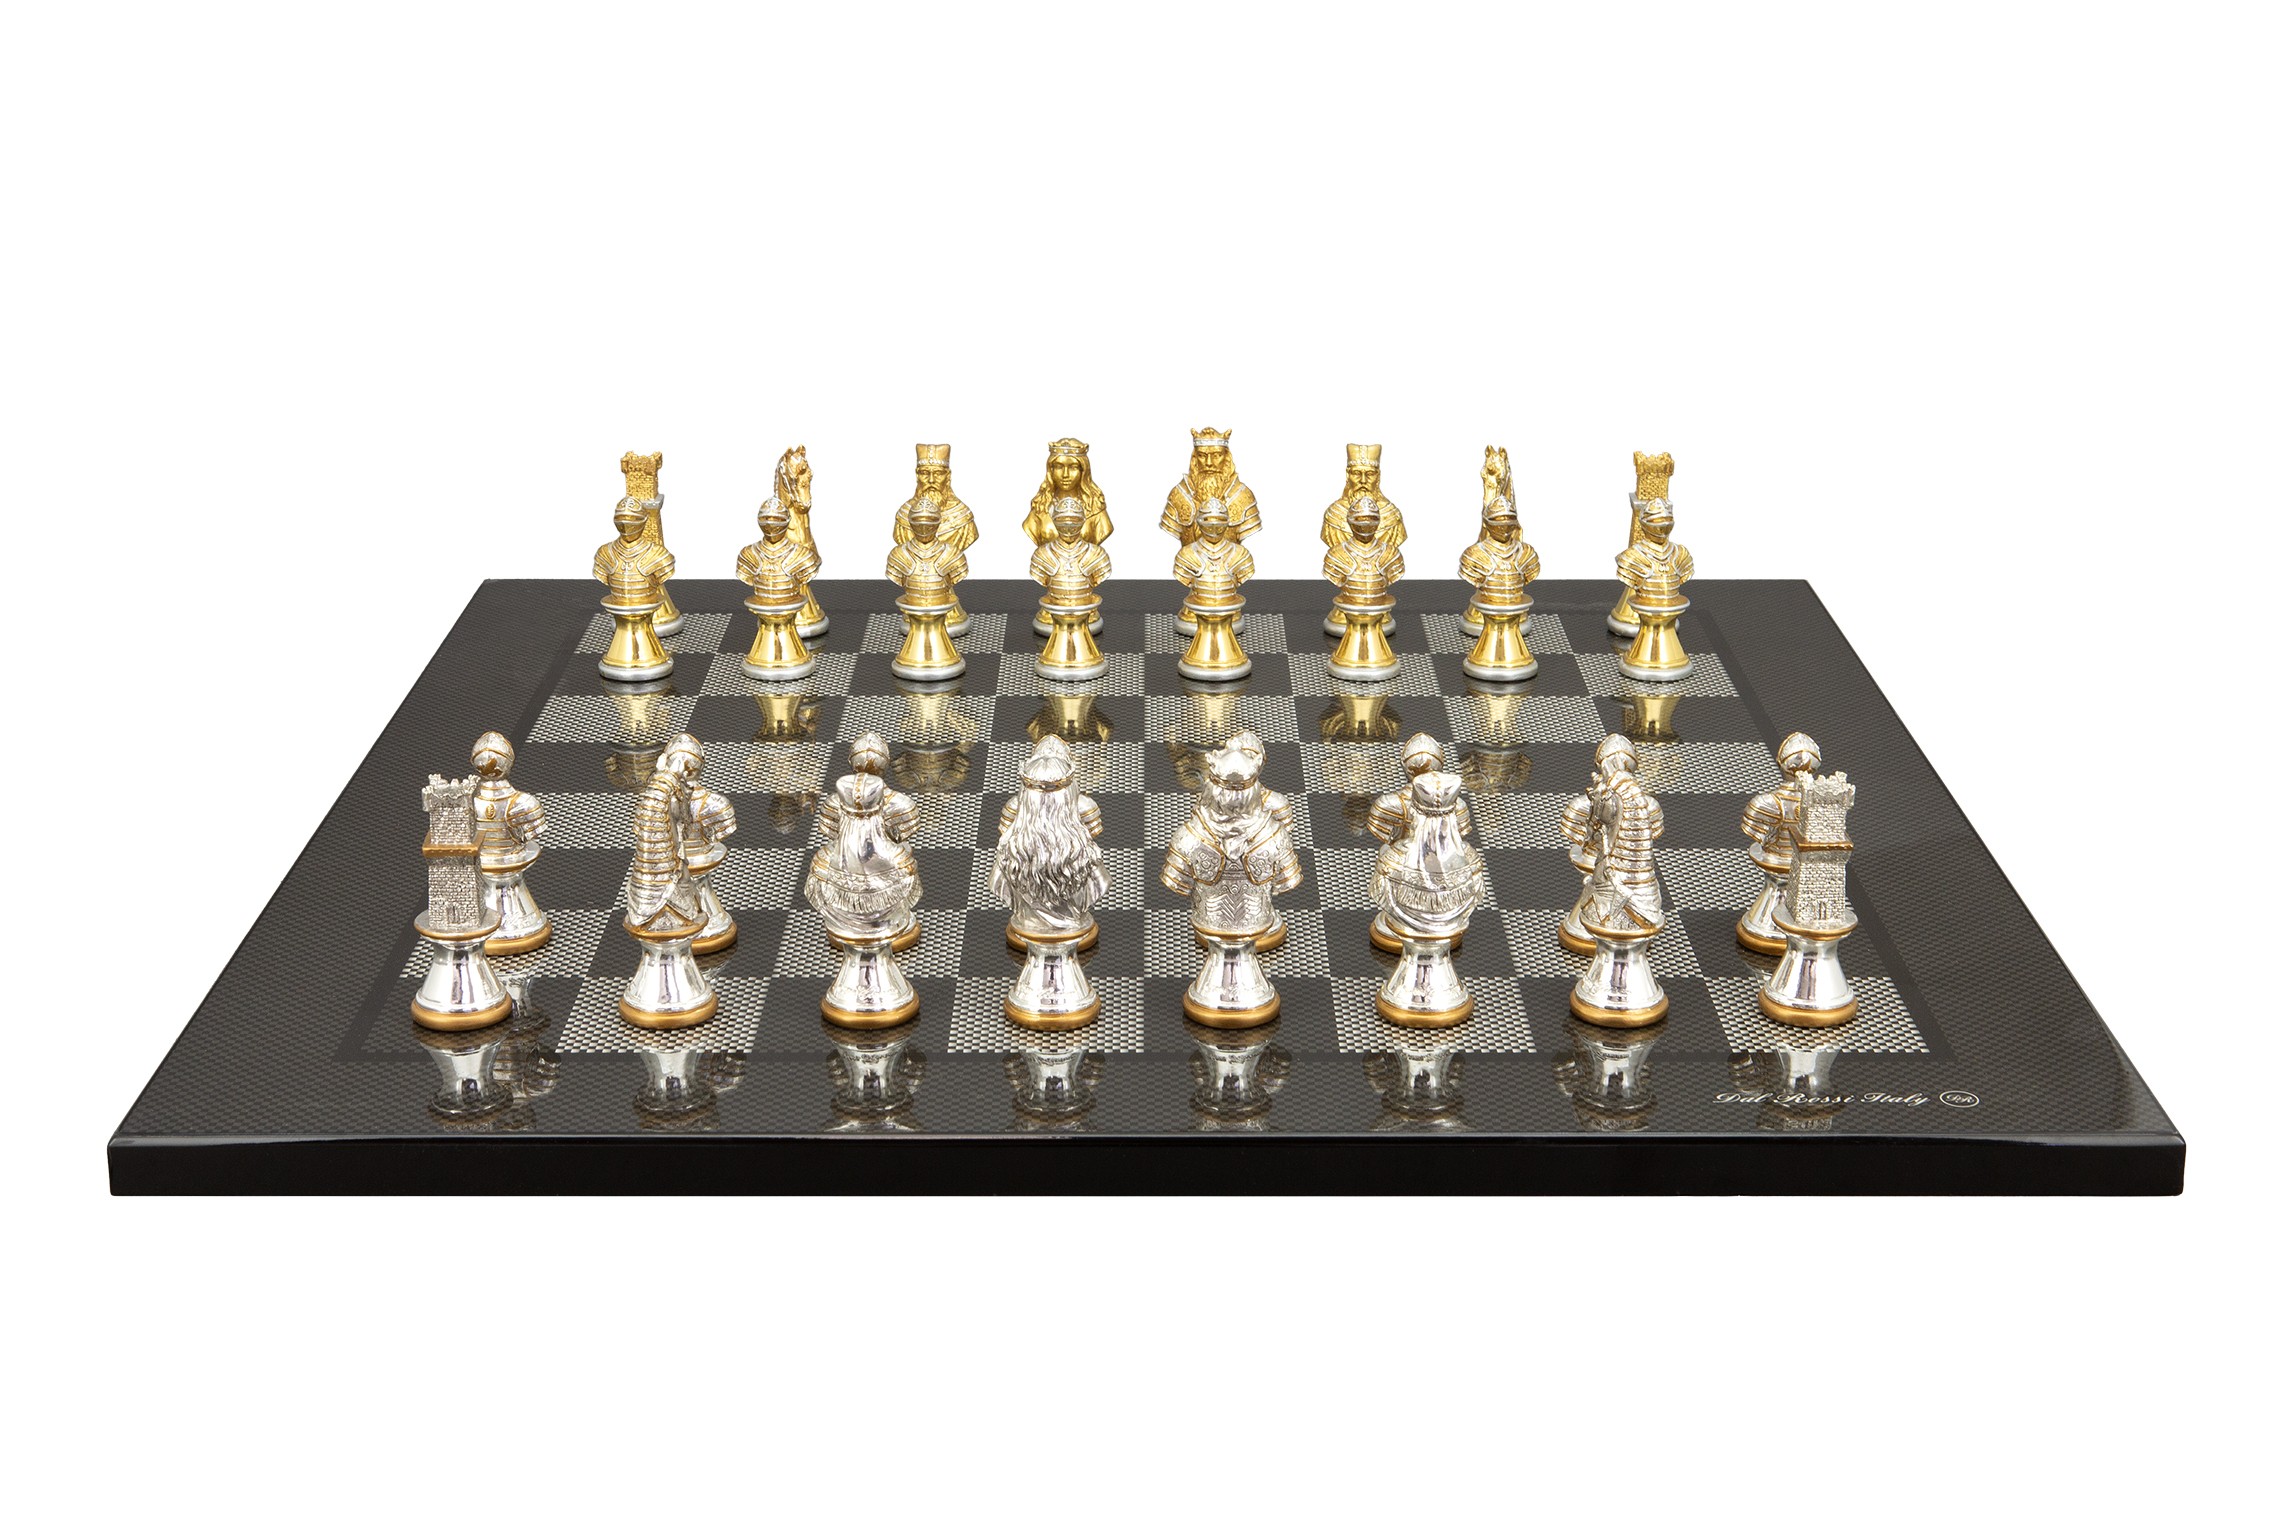 Dal Rossi Italy, Medieval Warriors Metal Chessmen 85mm on a Carbon Fibre Shinny Finish, 50cm Chess Board